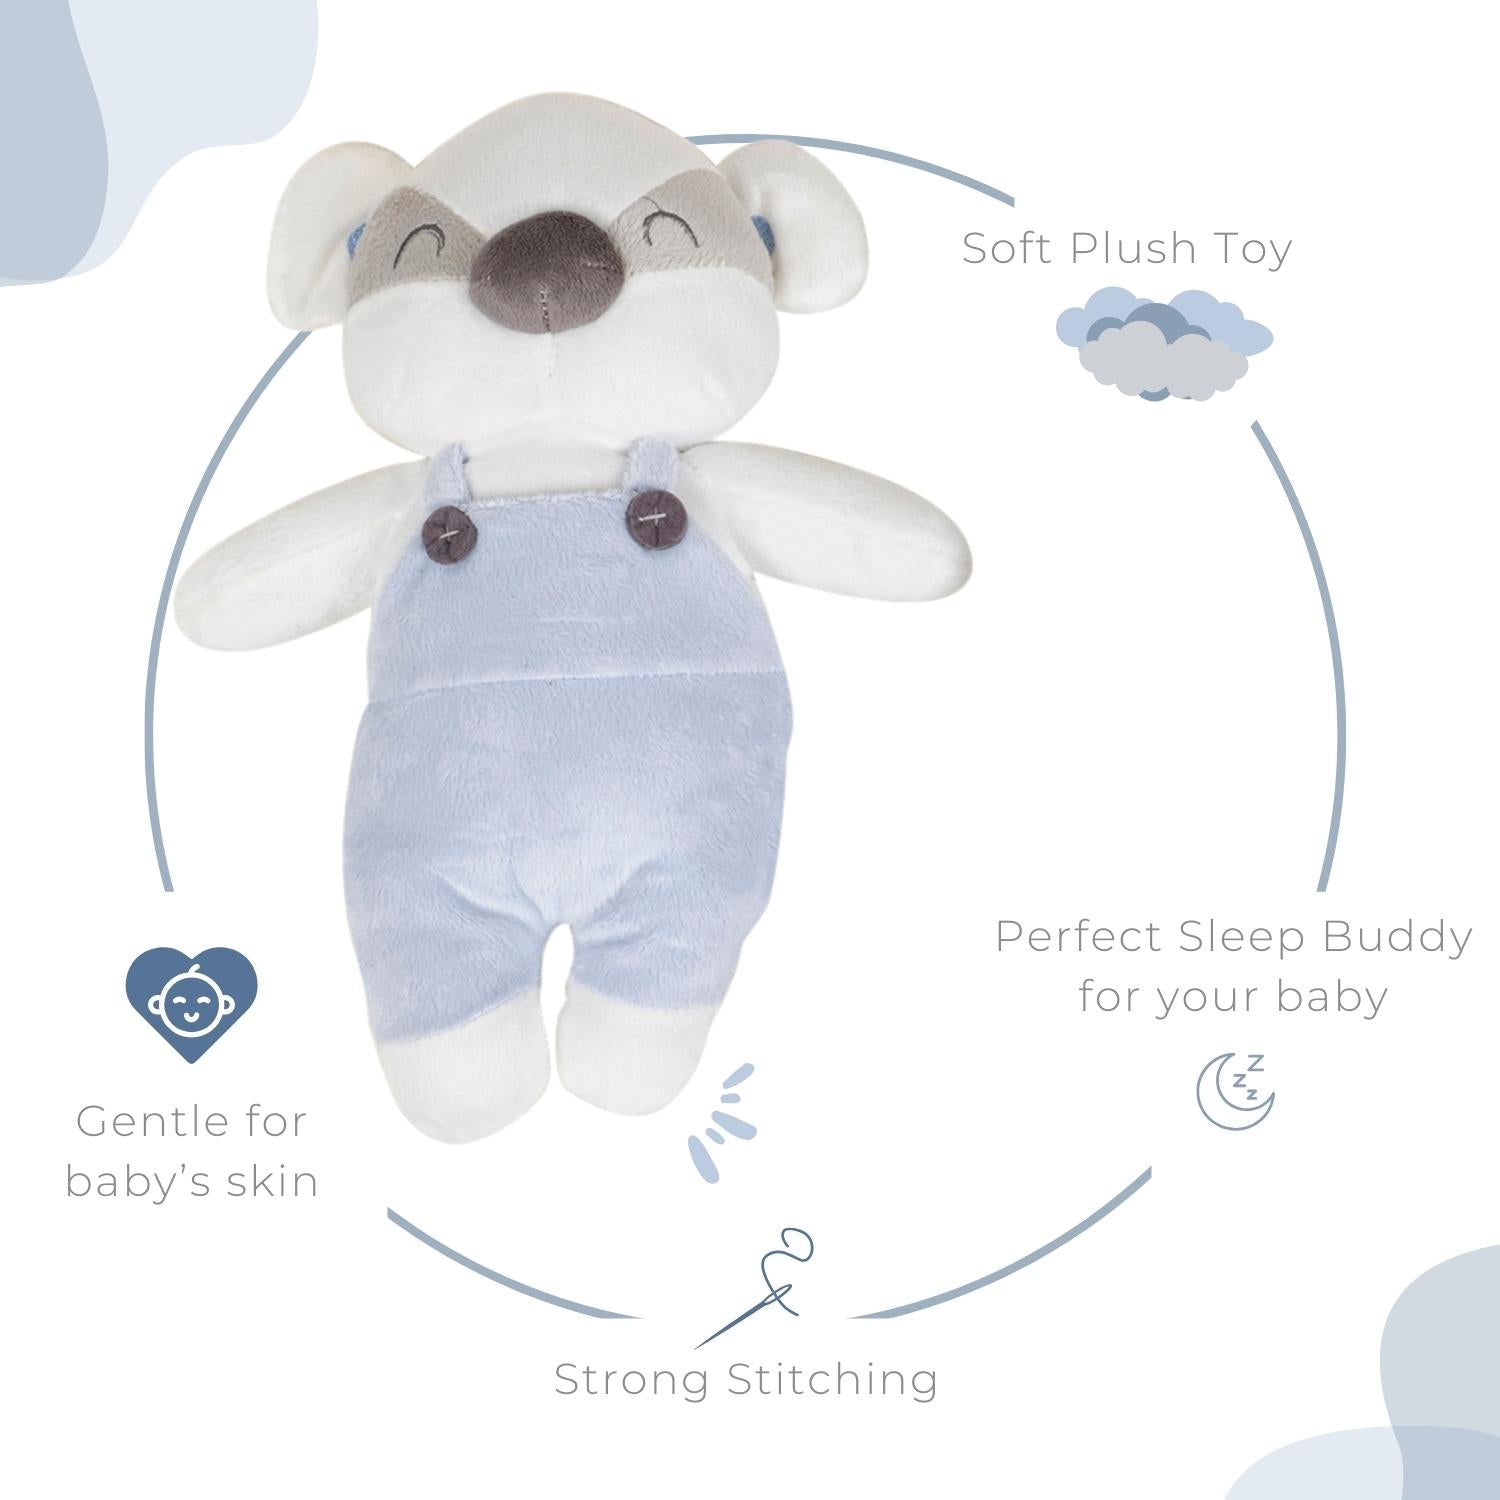 Baby Moo Bear Snuggle Buddy Soft Rattle and Plush Blanket Gift Toy Blanket - Blue